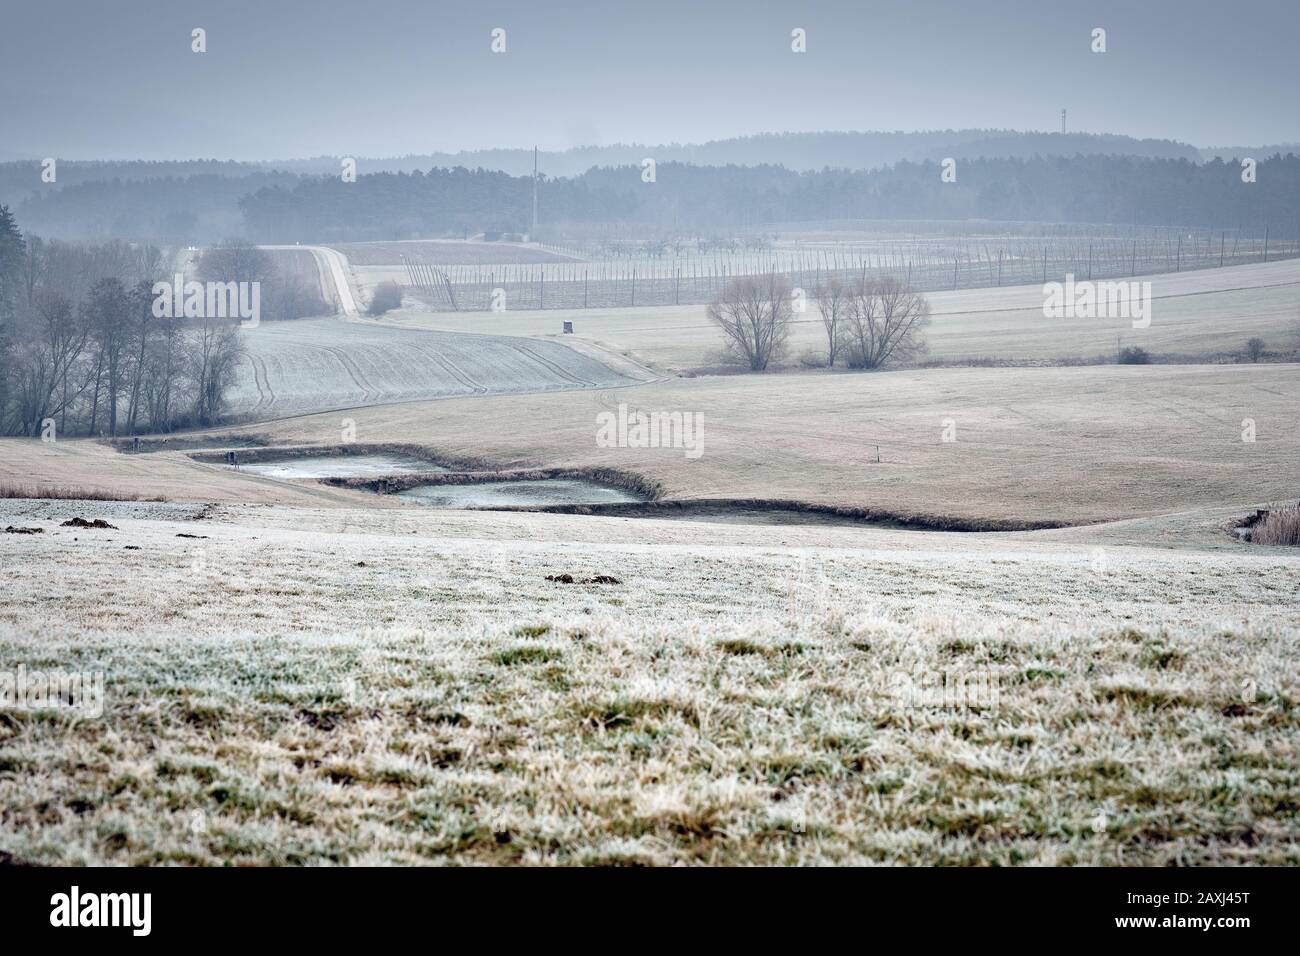 Moody cold countryside winter landscape on a day with dense grey high fog. Seen near Bullach in Franconia / Bararia, Germany in January. Stock Photo